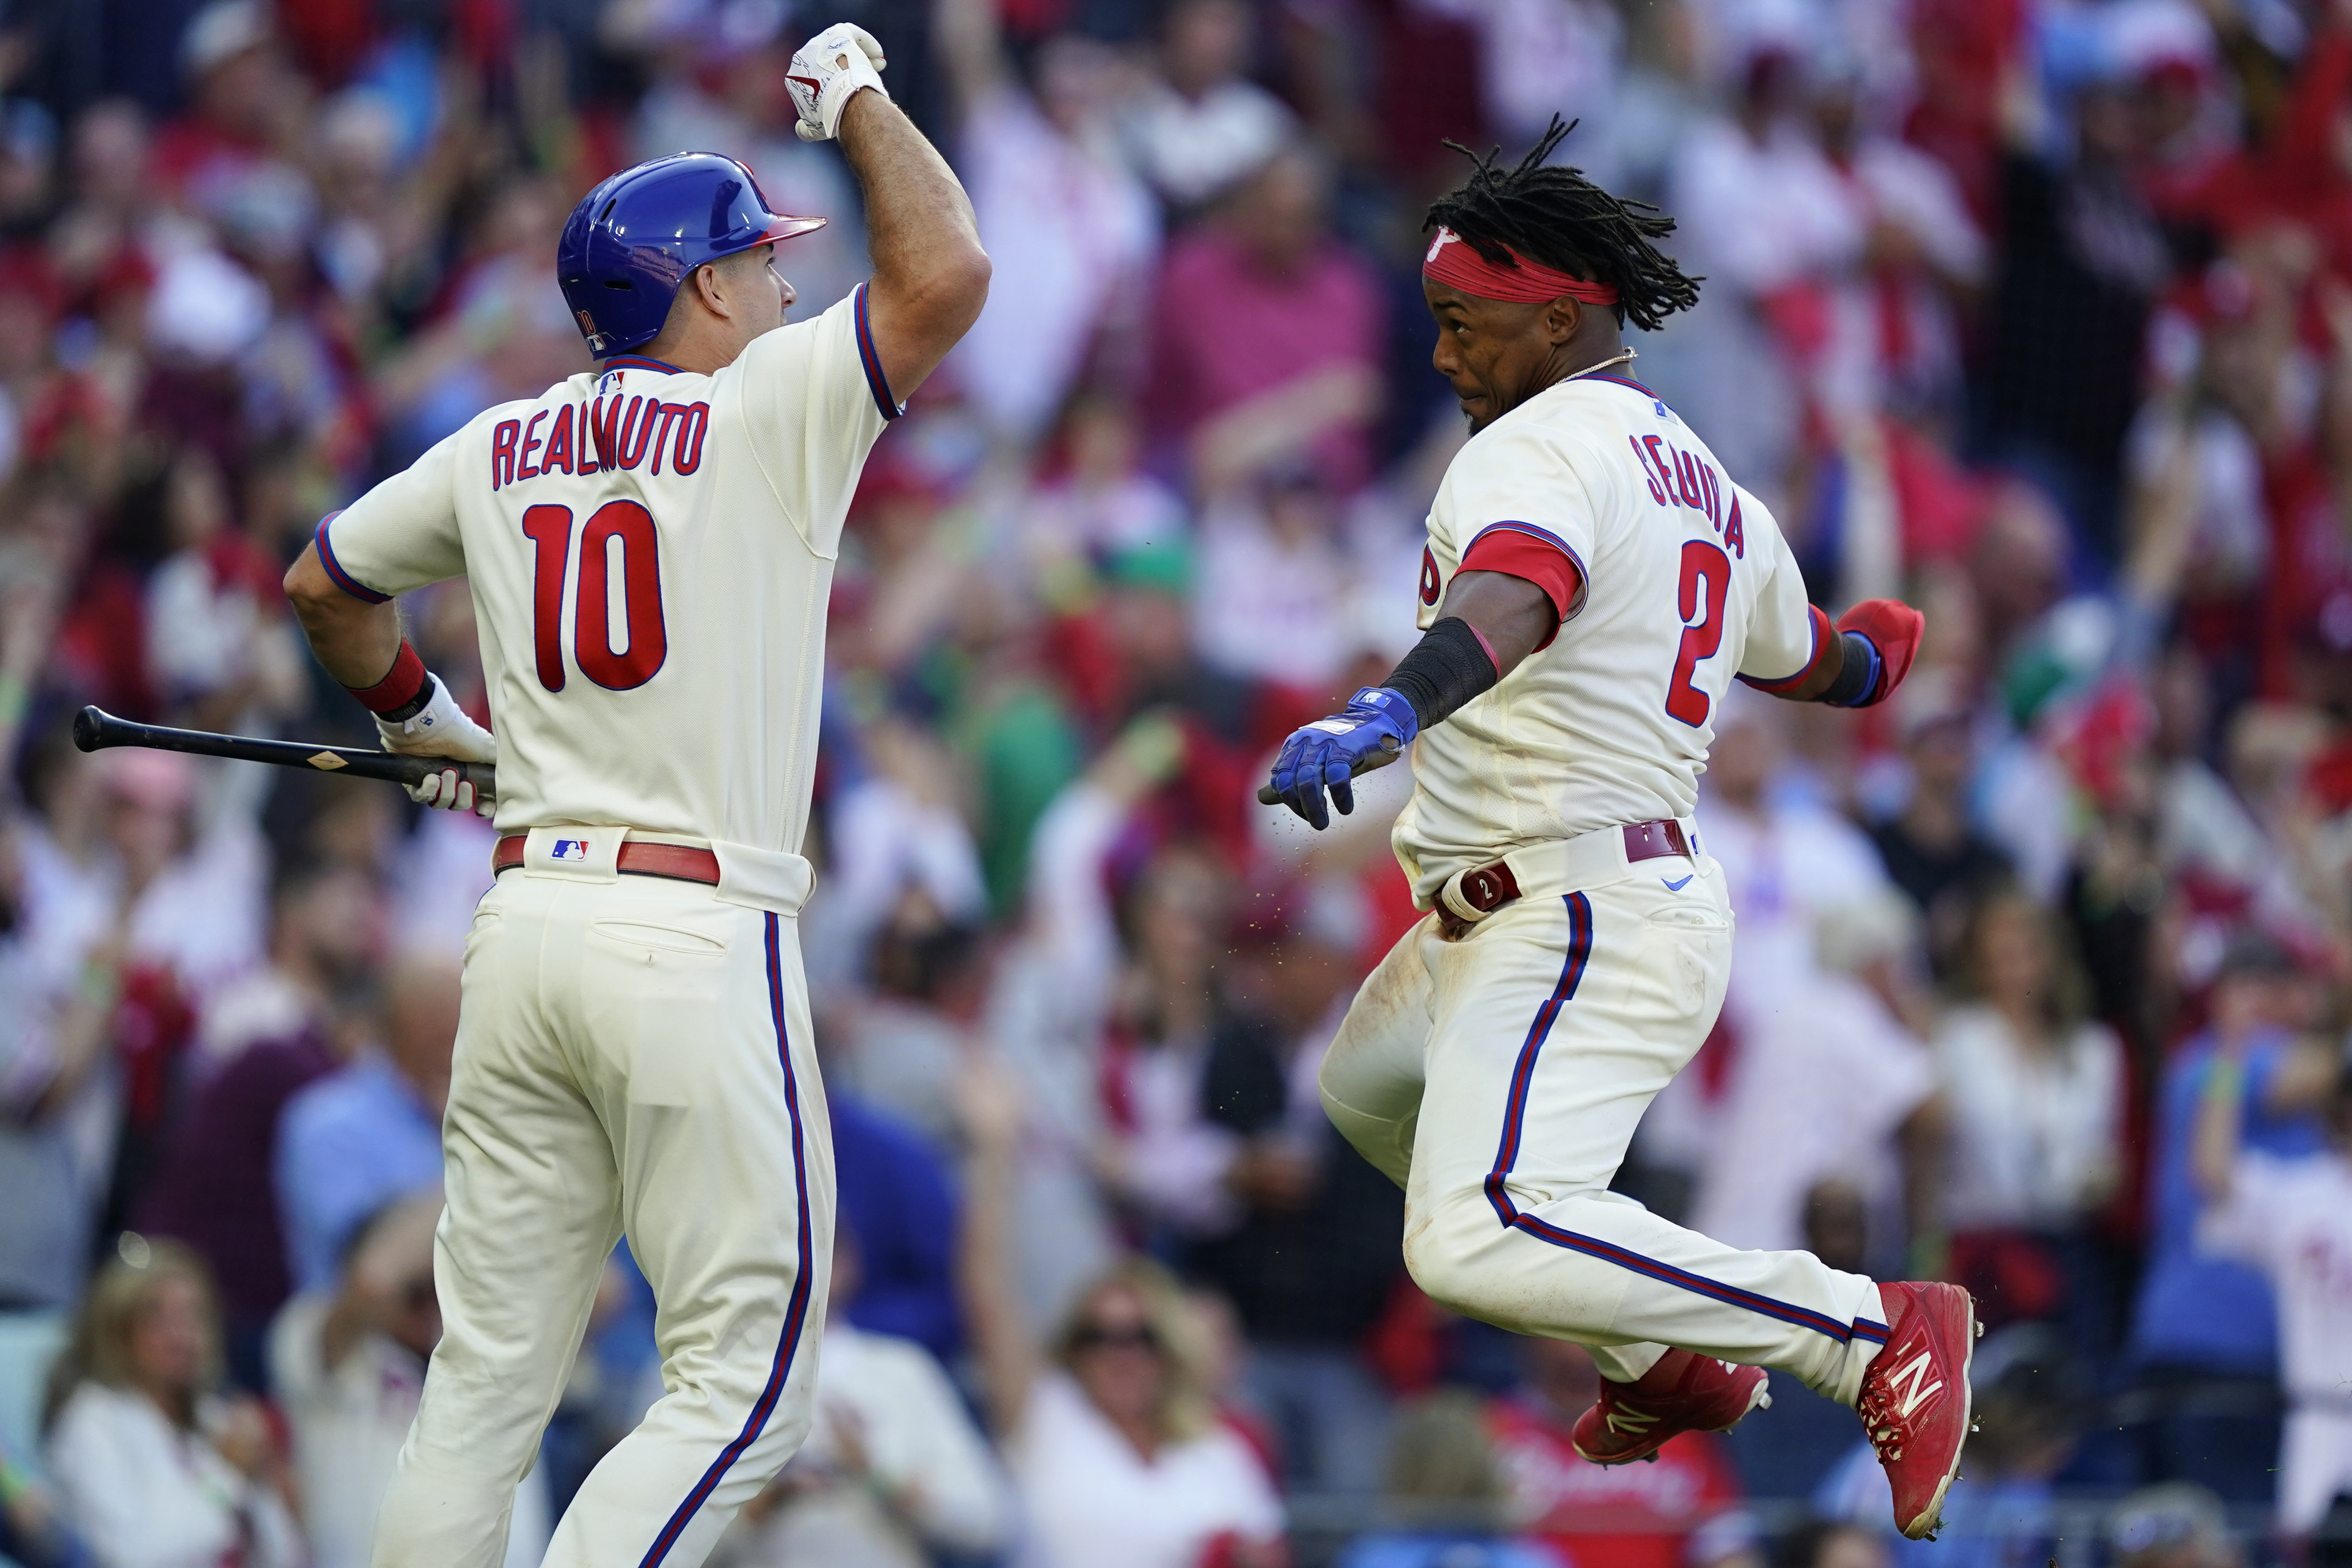 Bohm helps Phils beat Braves 7-2, take 2 of 3 from Atlanta - The